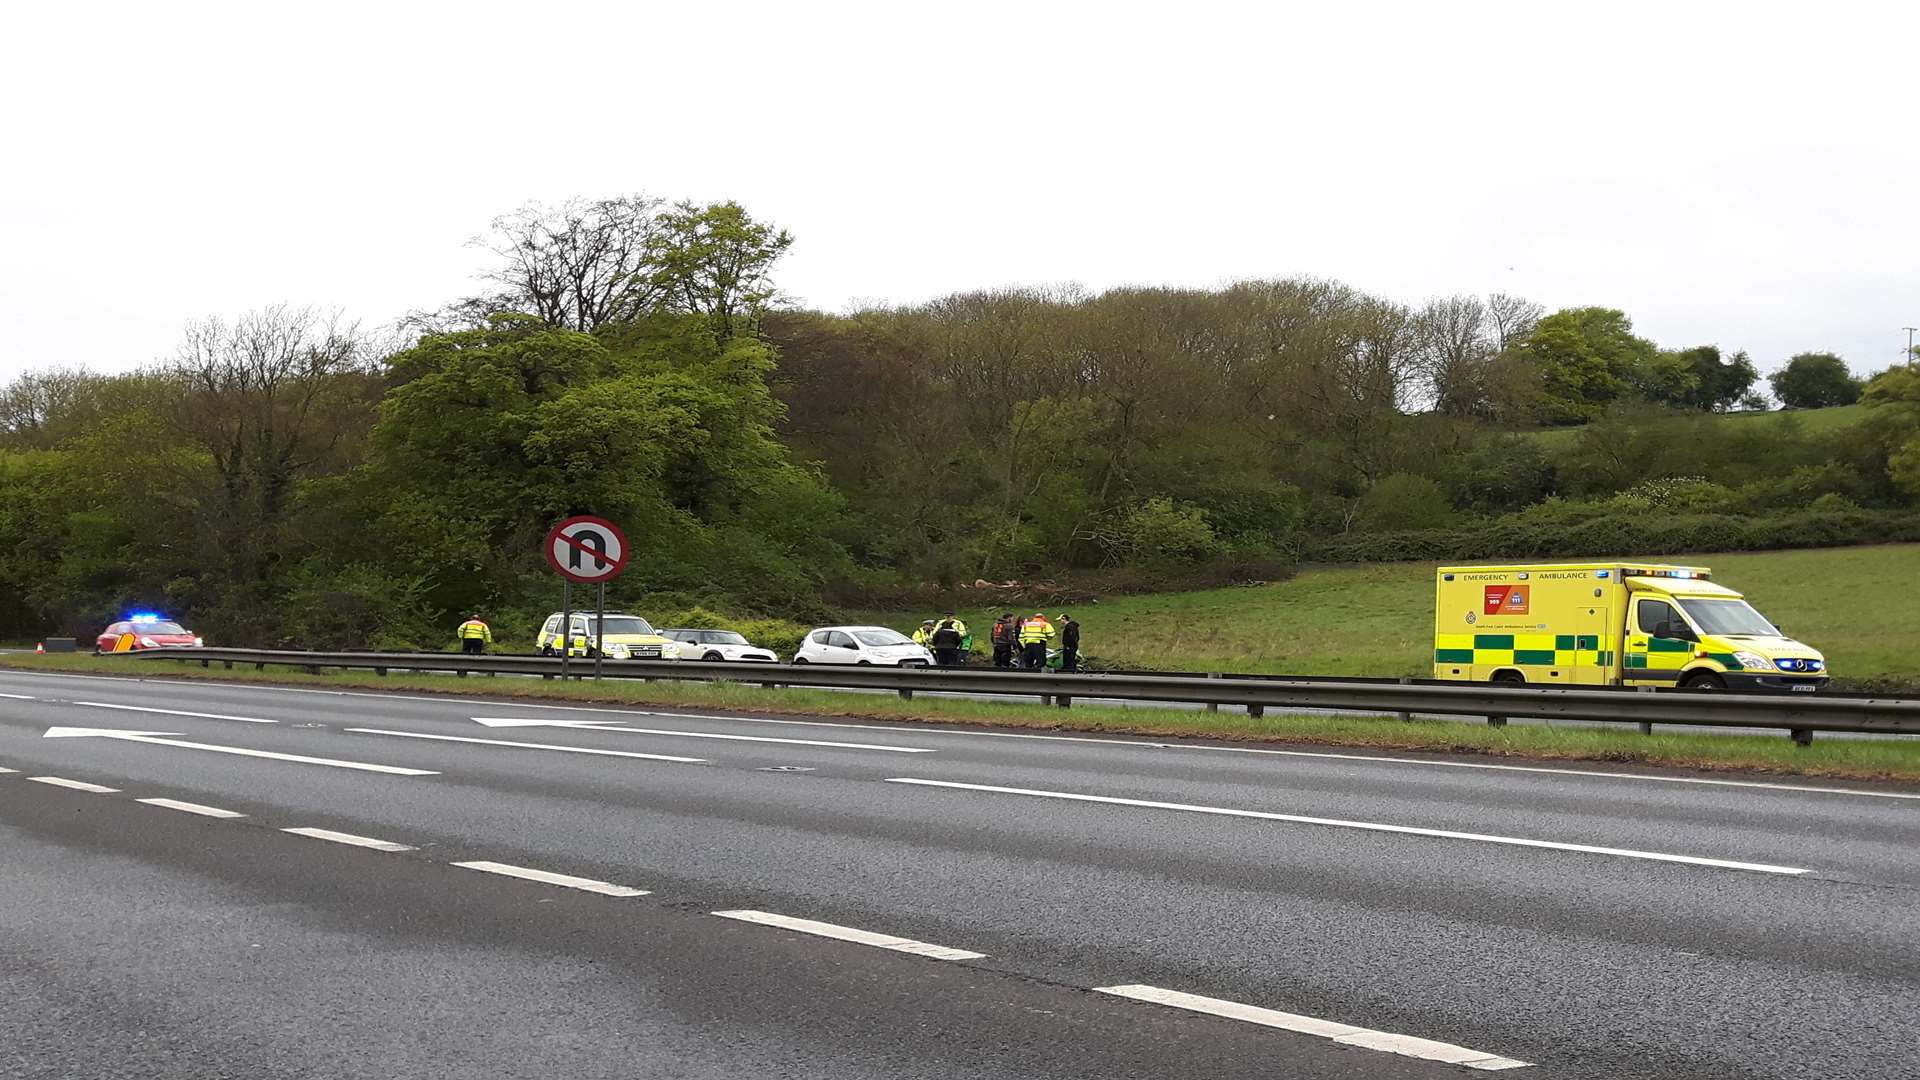 Police and ambulance on the A249 near Hucking.